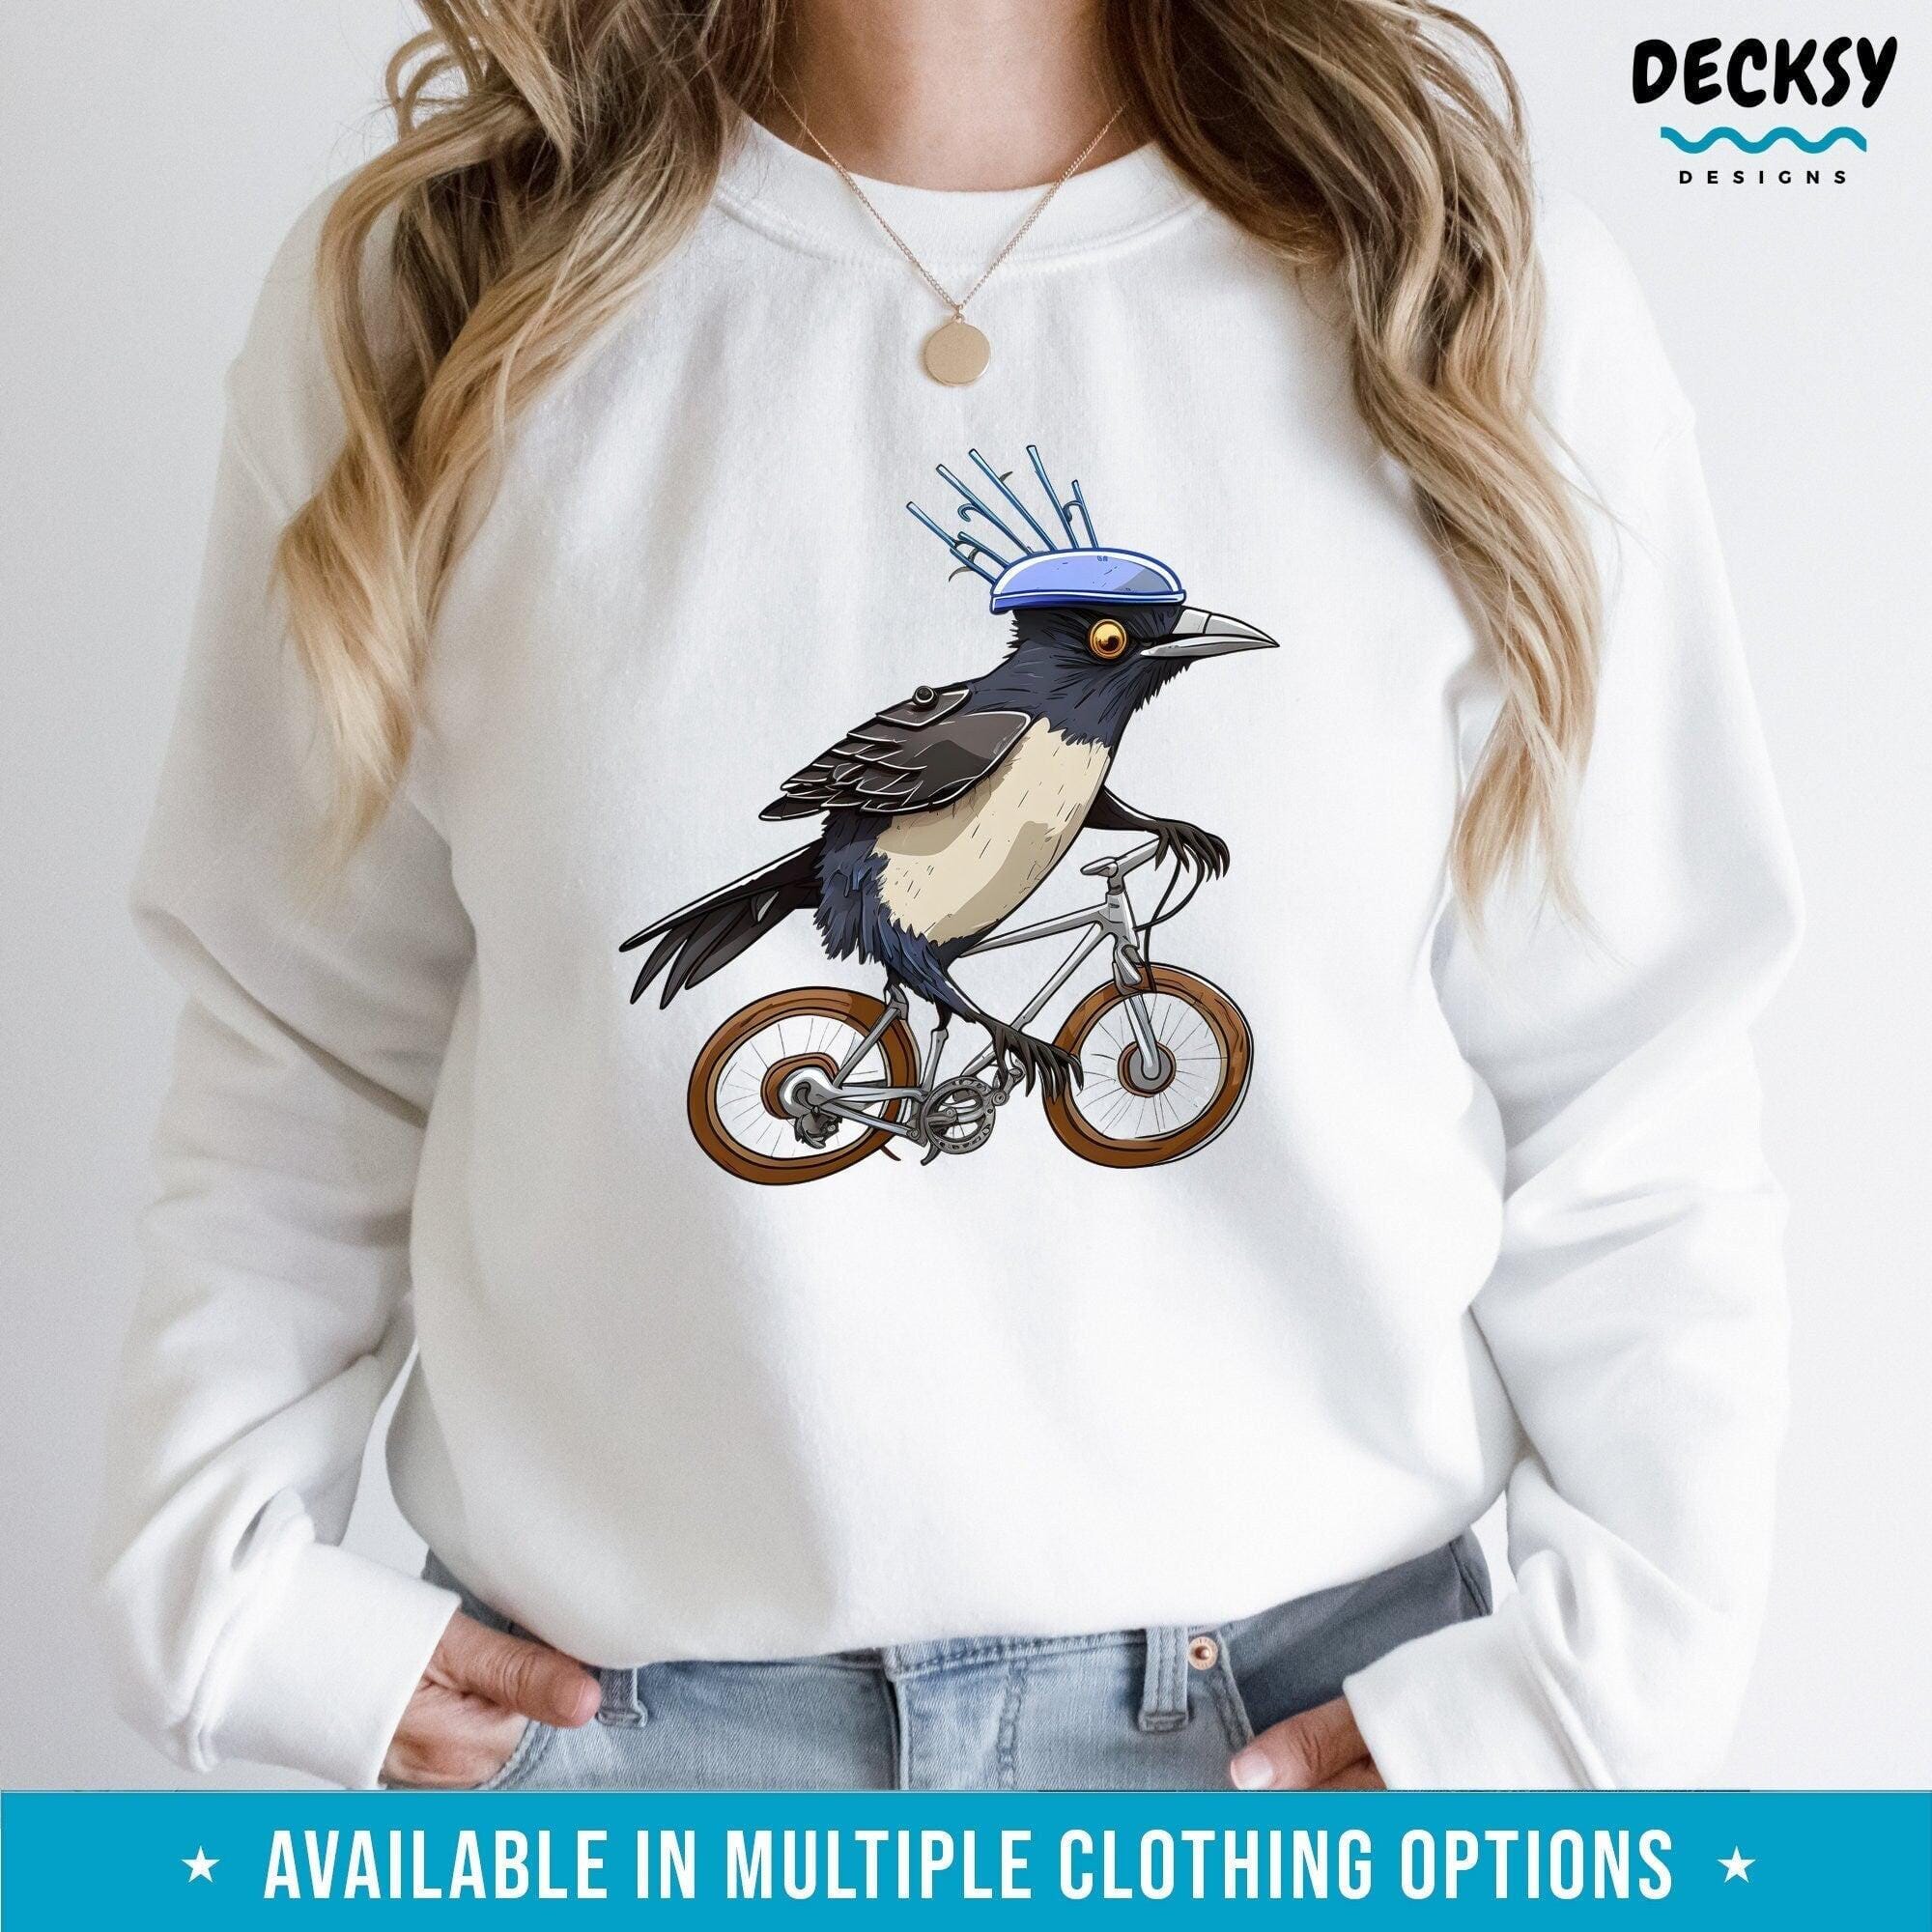 Magpie on a Bike Shirt, Funny Australian Birds Gift-Clothing:Gender-Neutral Adult Clothing:Tops & Tees:T-shirts:Graphic Tees-DecksyDesigns